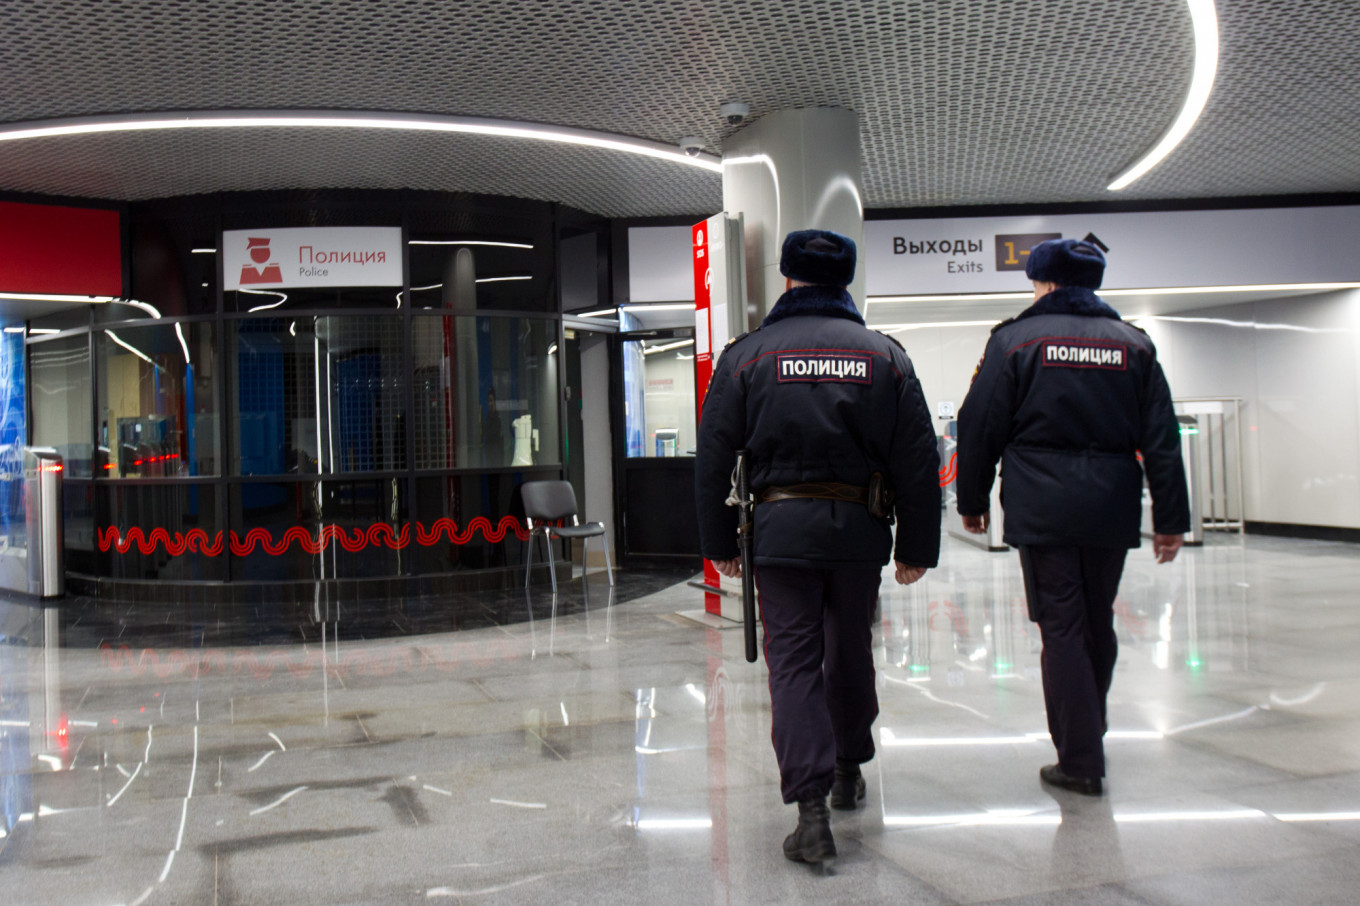 Two Dead in Moscow Metro Shooting — Reports The Moscow Times